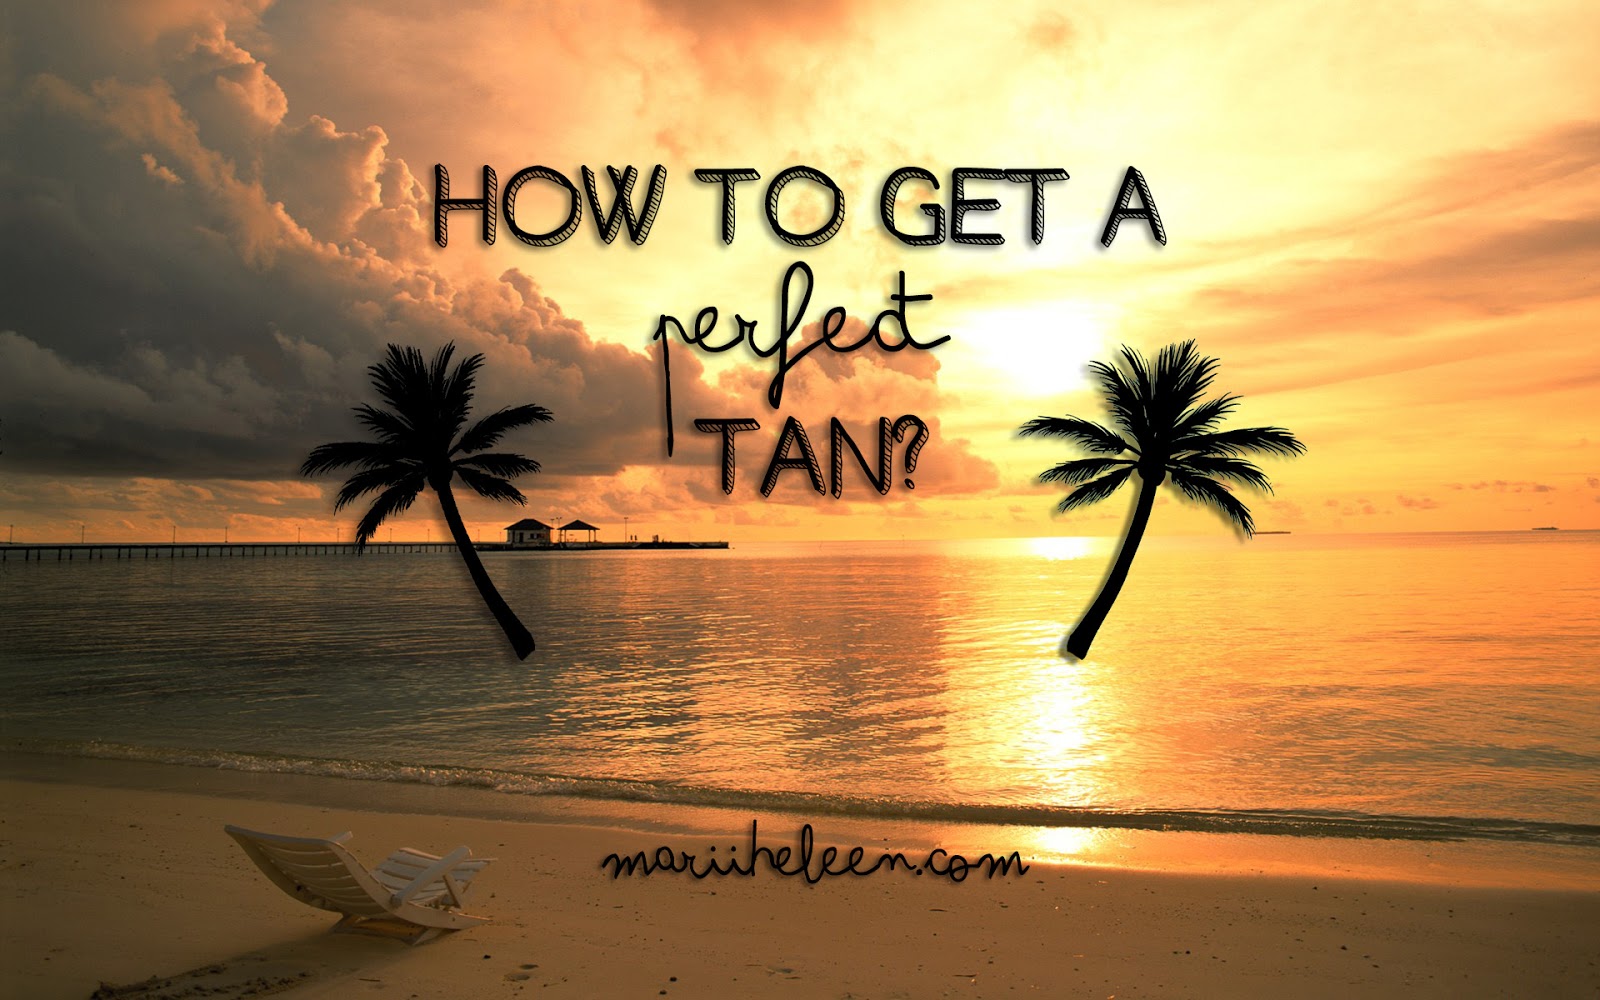 How to Get the Perfect Tan